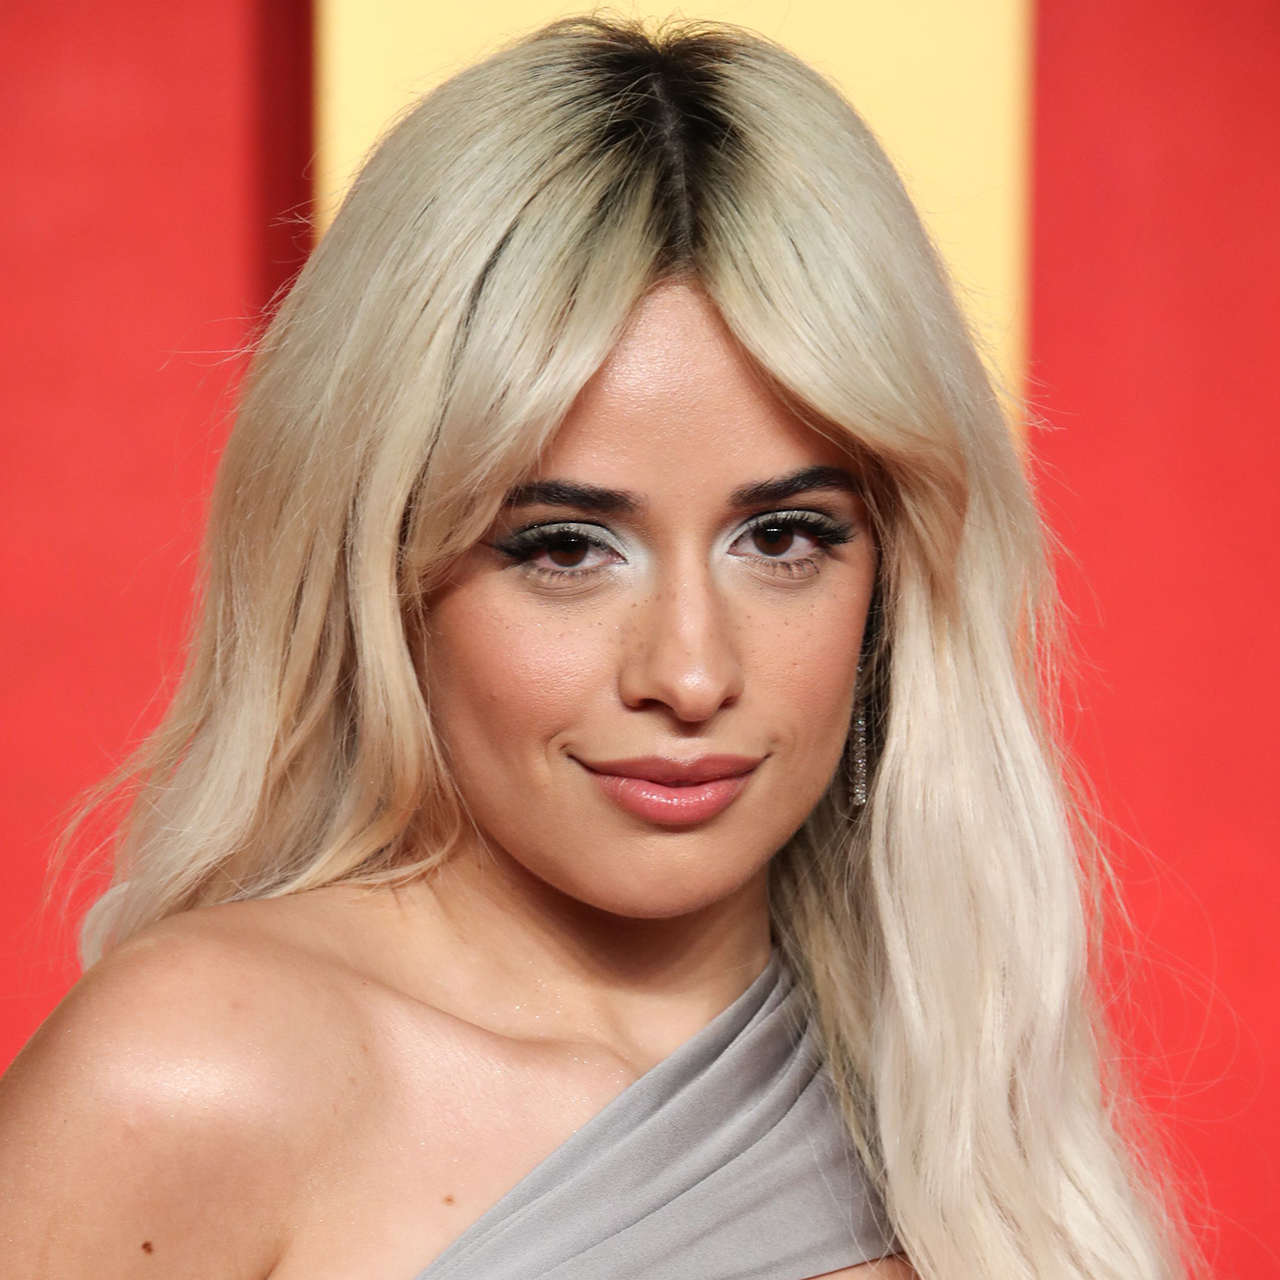 Fans Are Losing It Over Camila Cabello's No-Eyebrows Look For Her New  Magazine Cover: 'Whoever Was In Charge Of Her Brows Should Be Fired' -  SHEfinds